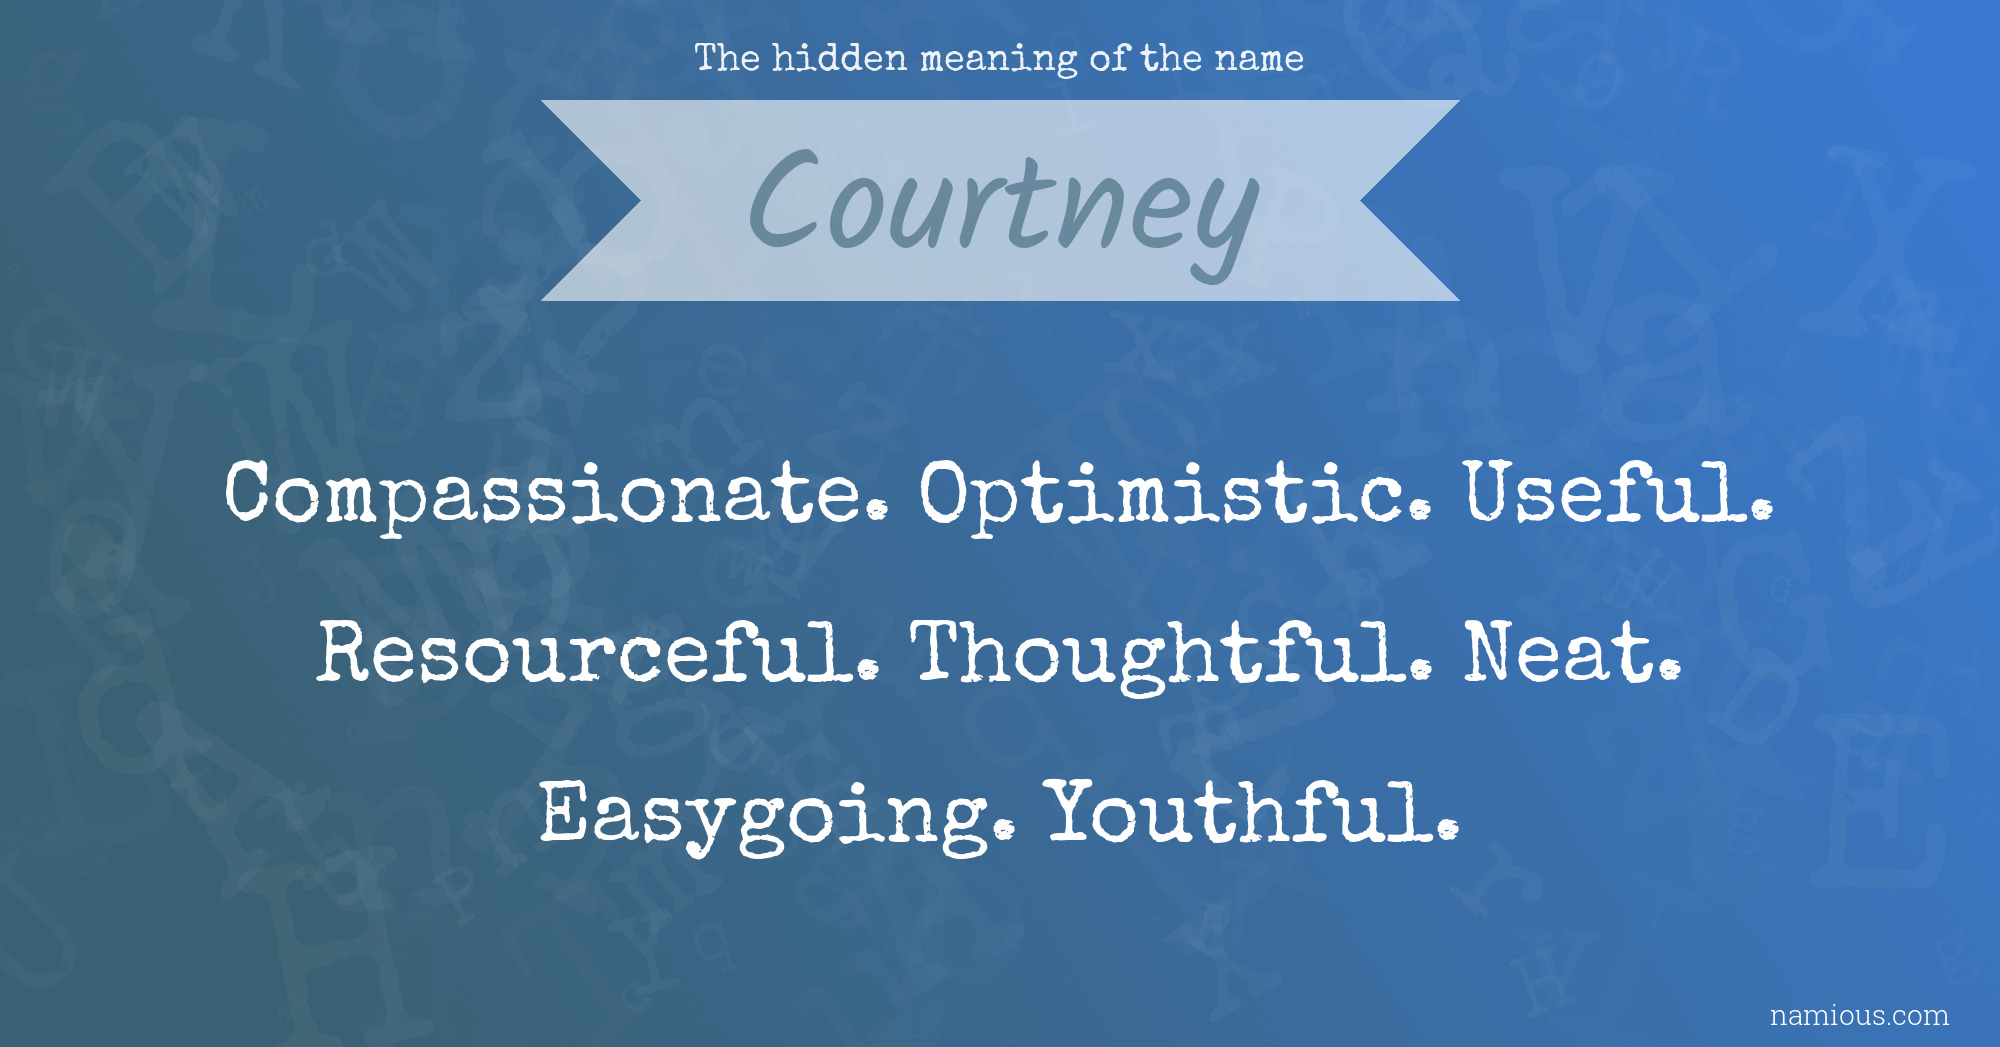 The hidden meaning of the name Courtney